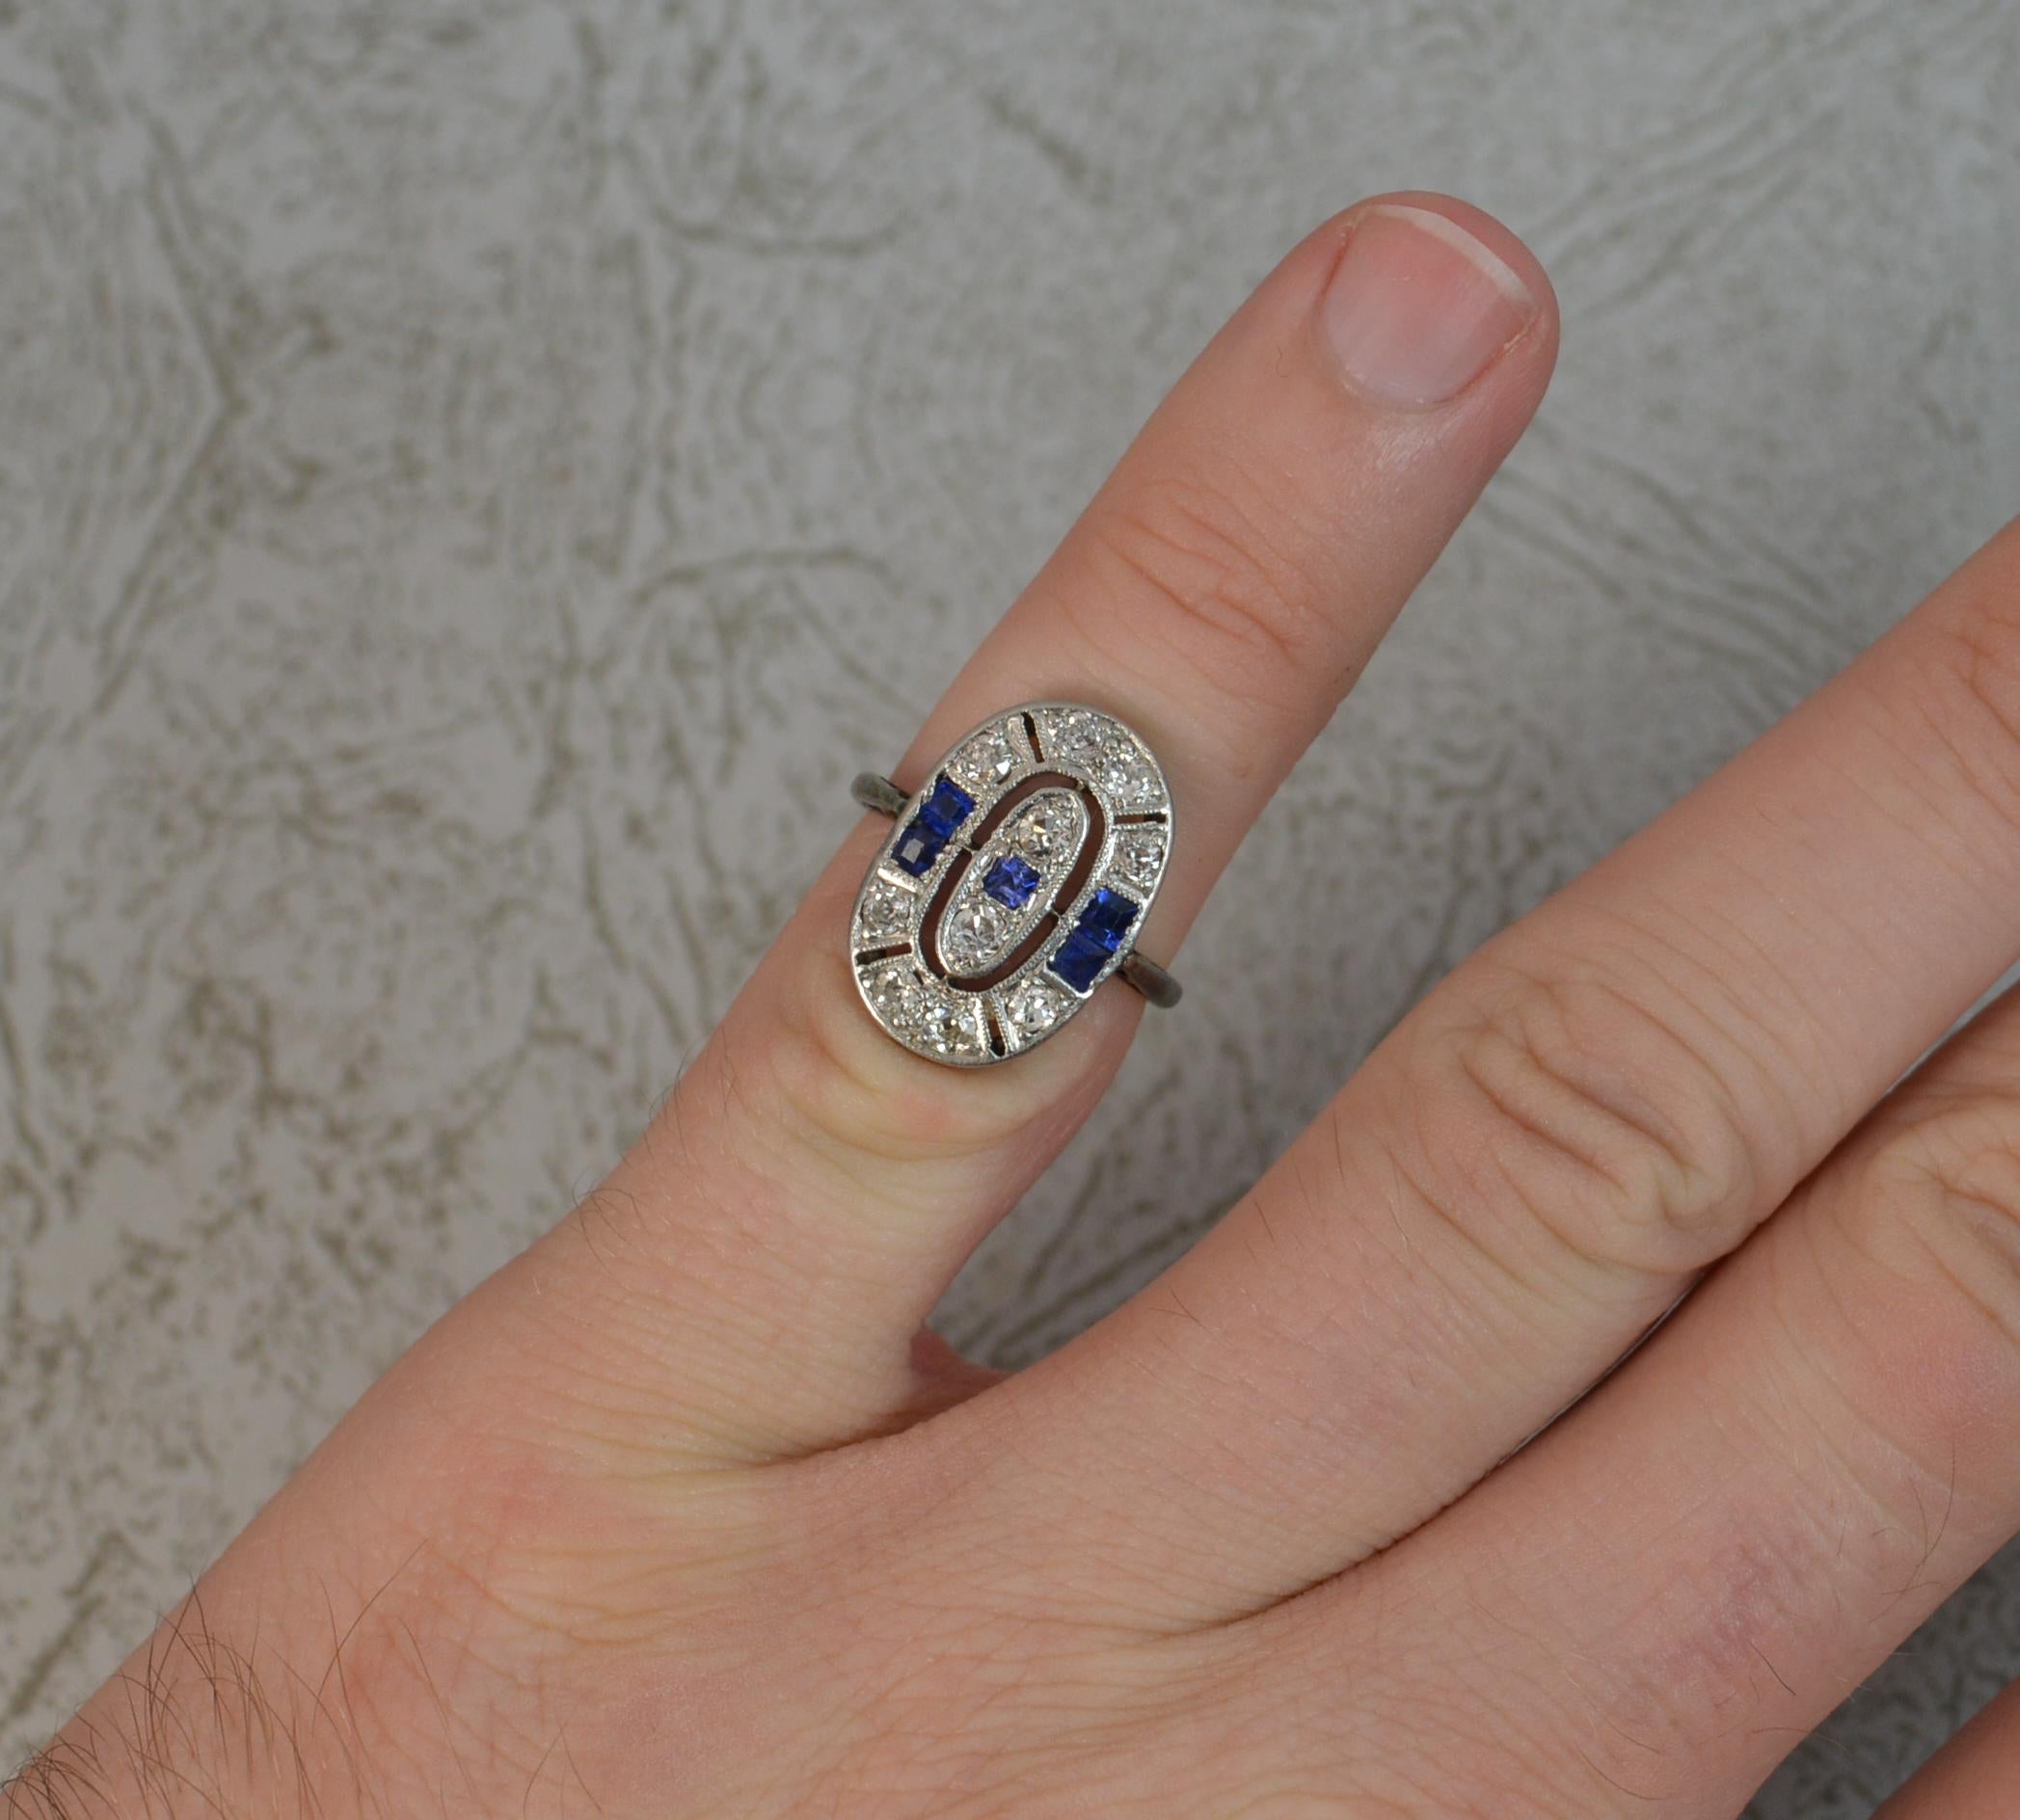 A superb 18ct gold, sapphire and diamond panel ring.
18 carat white gold shank with platinum head setting.
12mm x 17mm cluster head.
Formed with five princess cut blue sapphires and ten round cut diamonds.

CONDITION ; Very good for age. Clean and